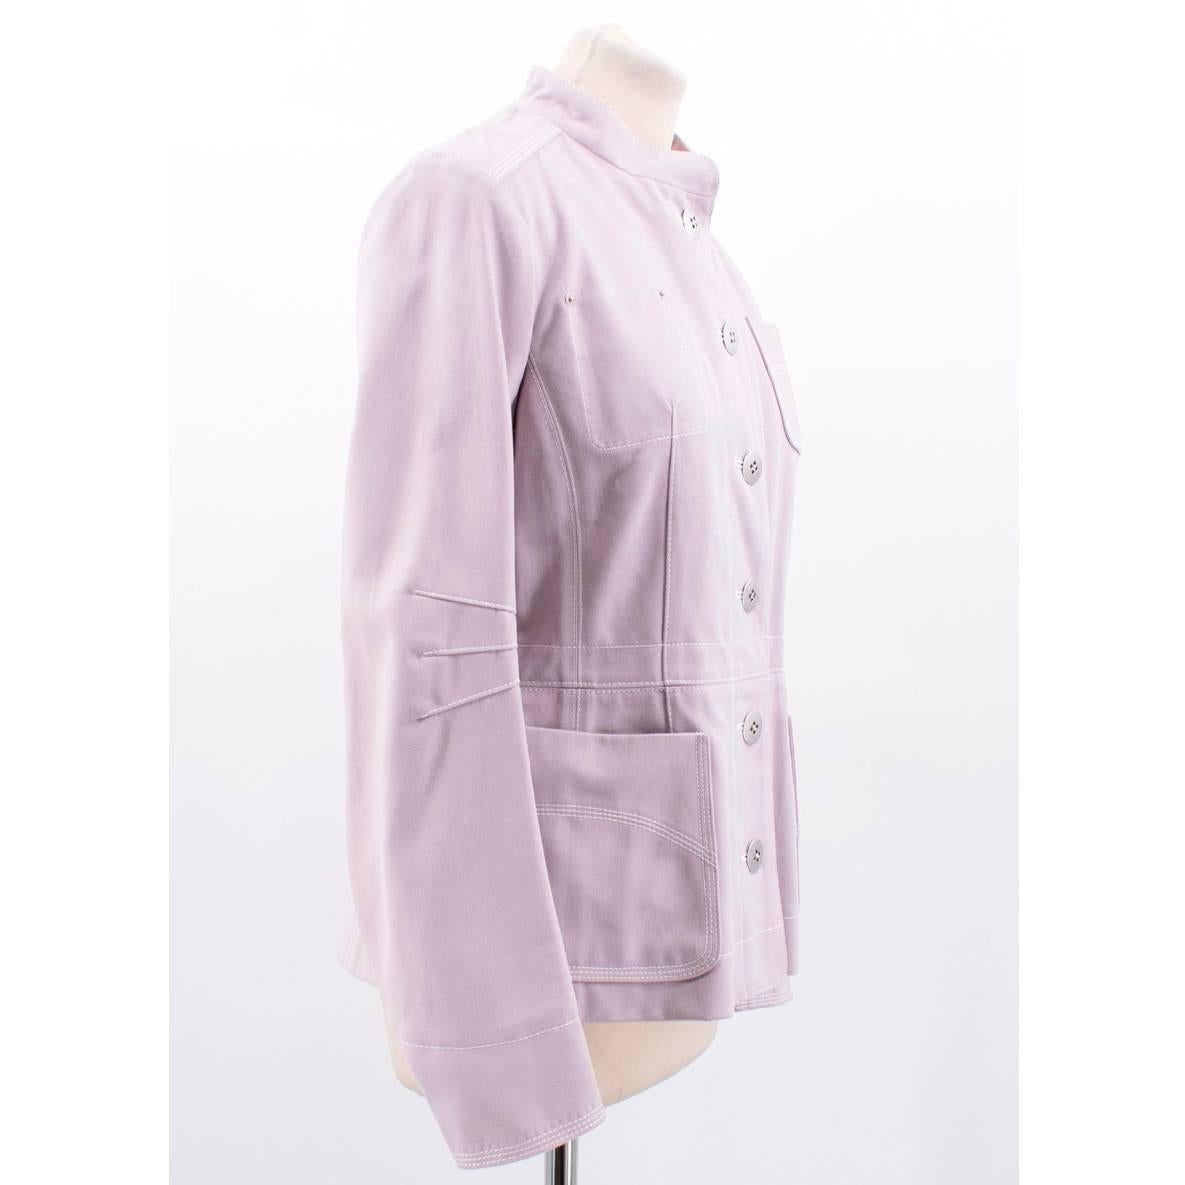 Louis Vuitton lavender military jacket in a fitted style featuring a mandarin collar with white contrast stitching and silver-tone buttons.

Size: US 8 
Measurements: Approx. Length - 62cm Sleeve - 45cm Bust - 47cm
Condition: 10/10

* Please note,